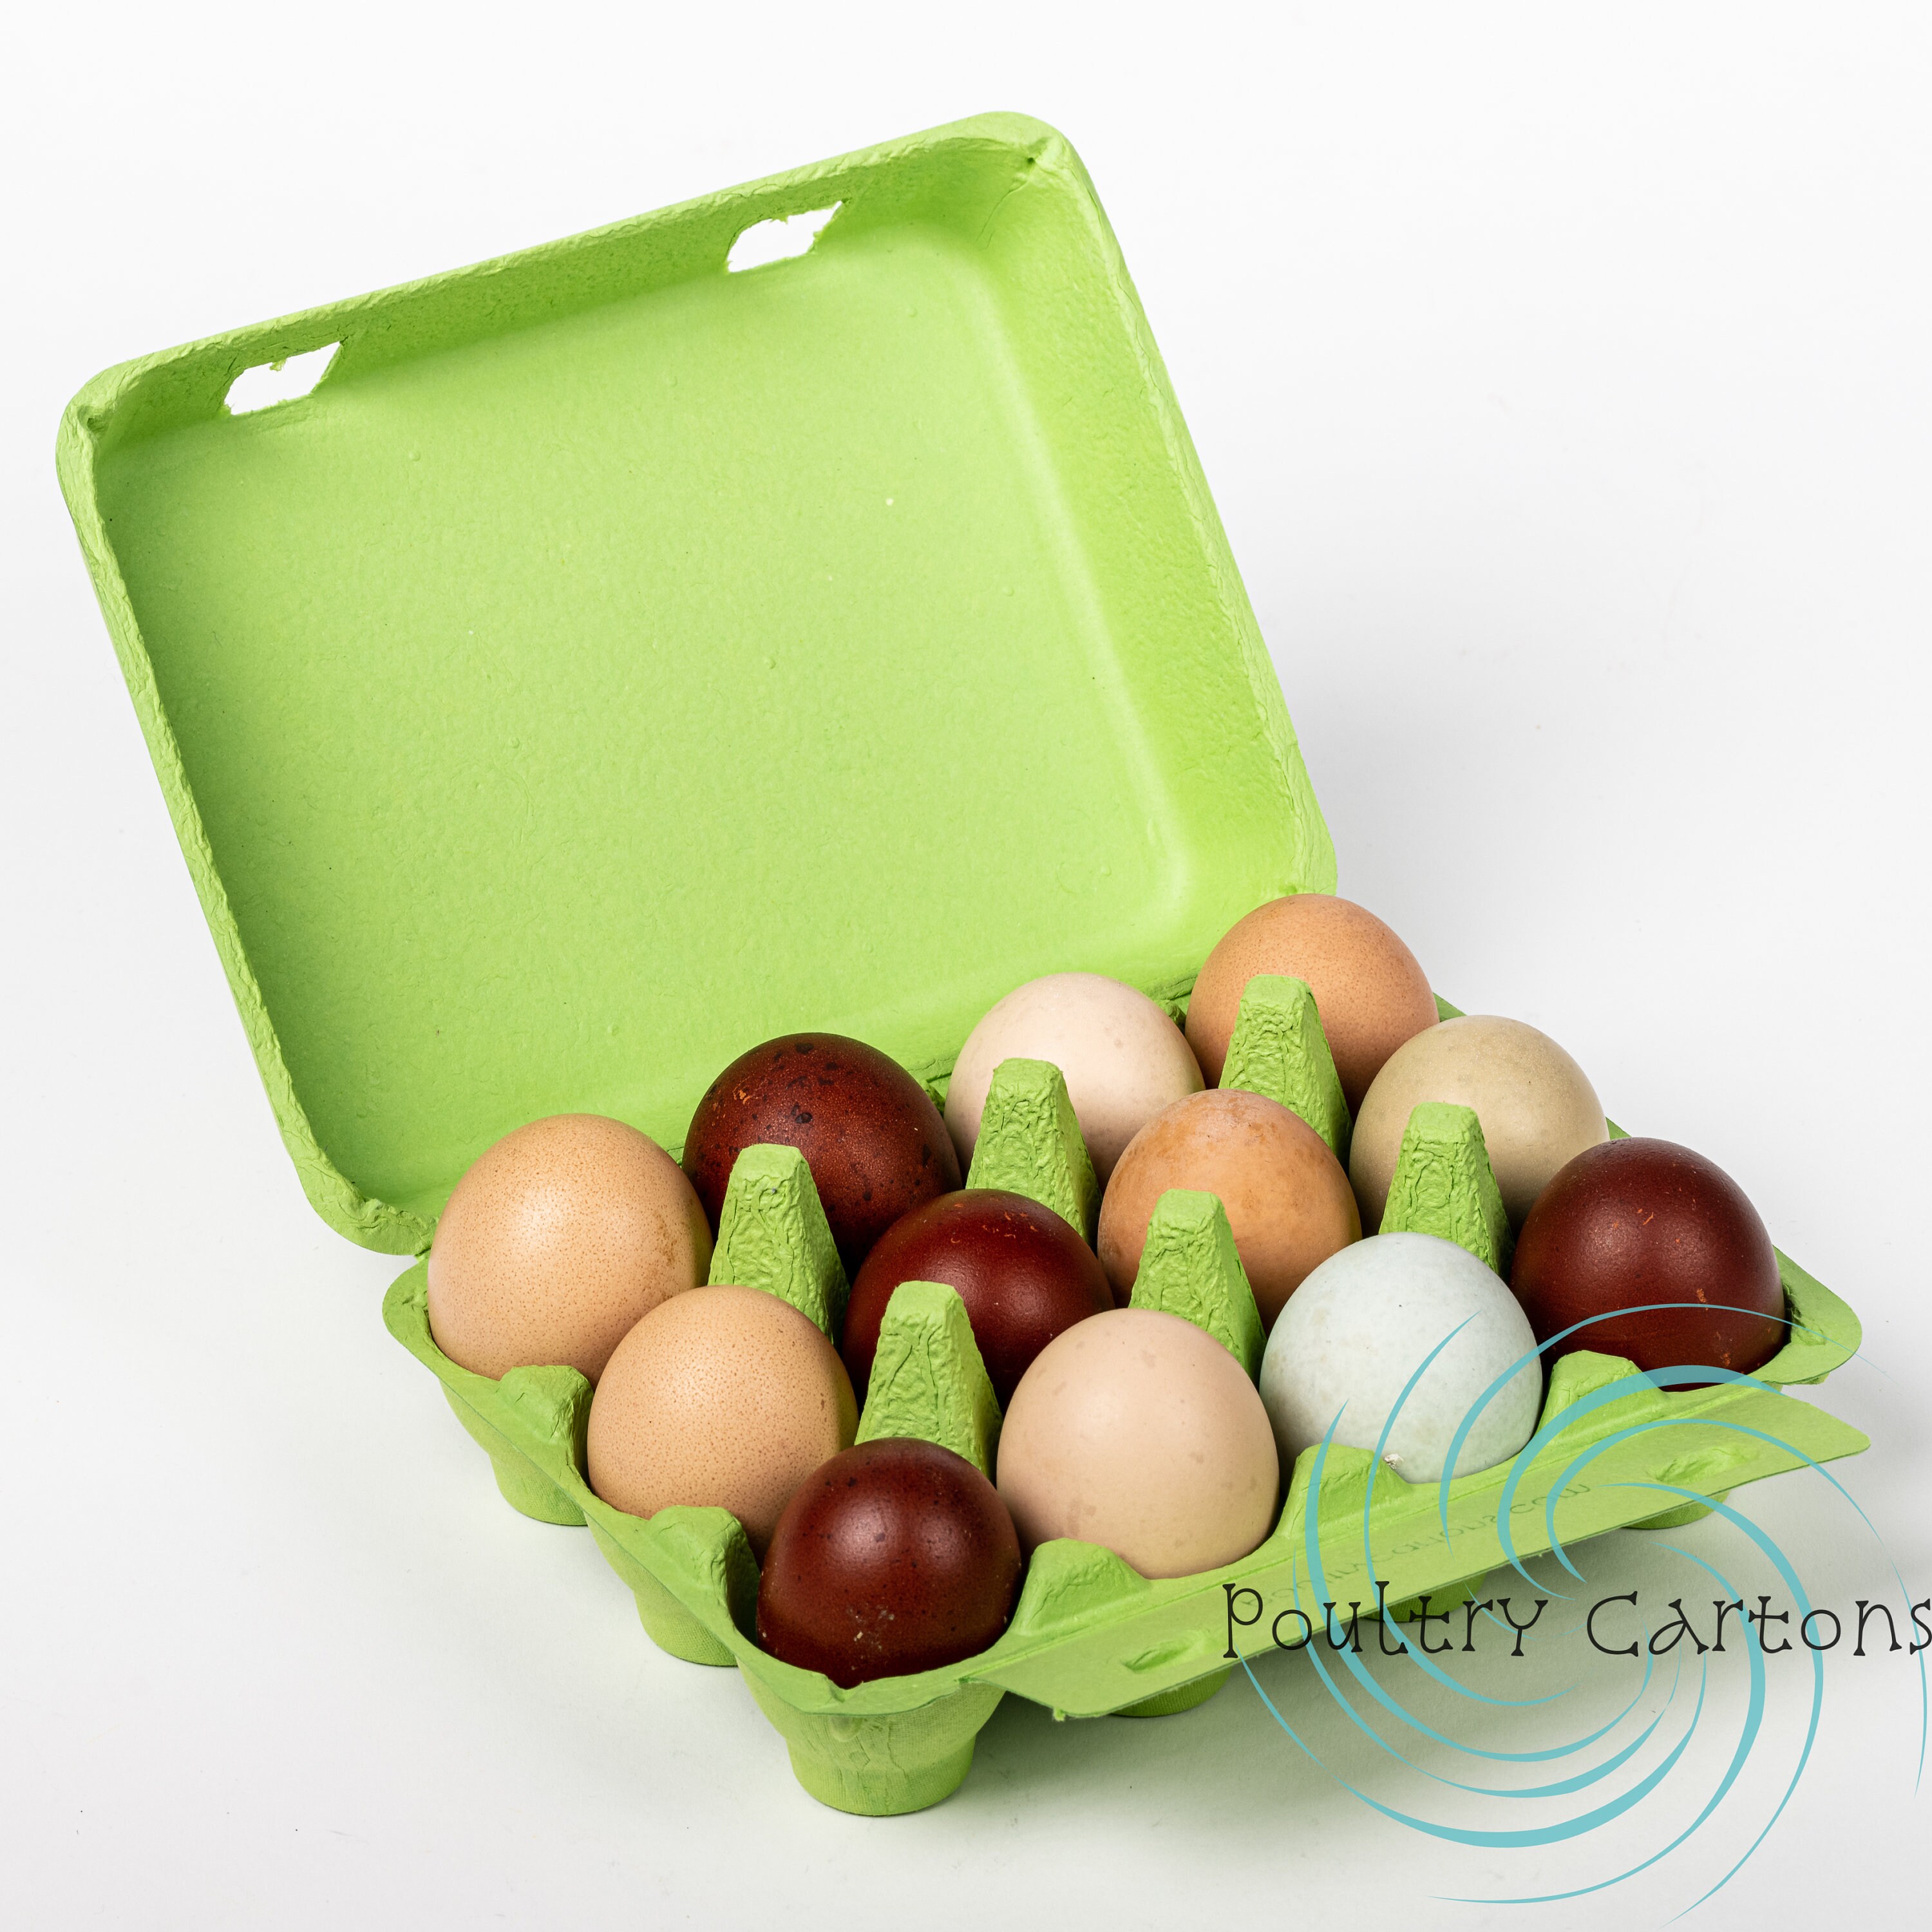 10-teal, Brown or Gray Split Egg Cartons, Cartons Hold 12 Eggs or